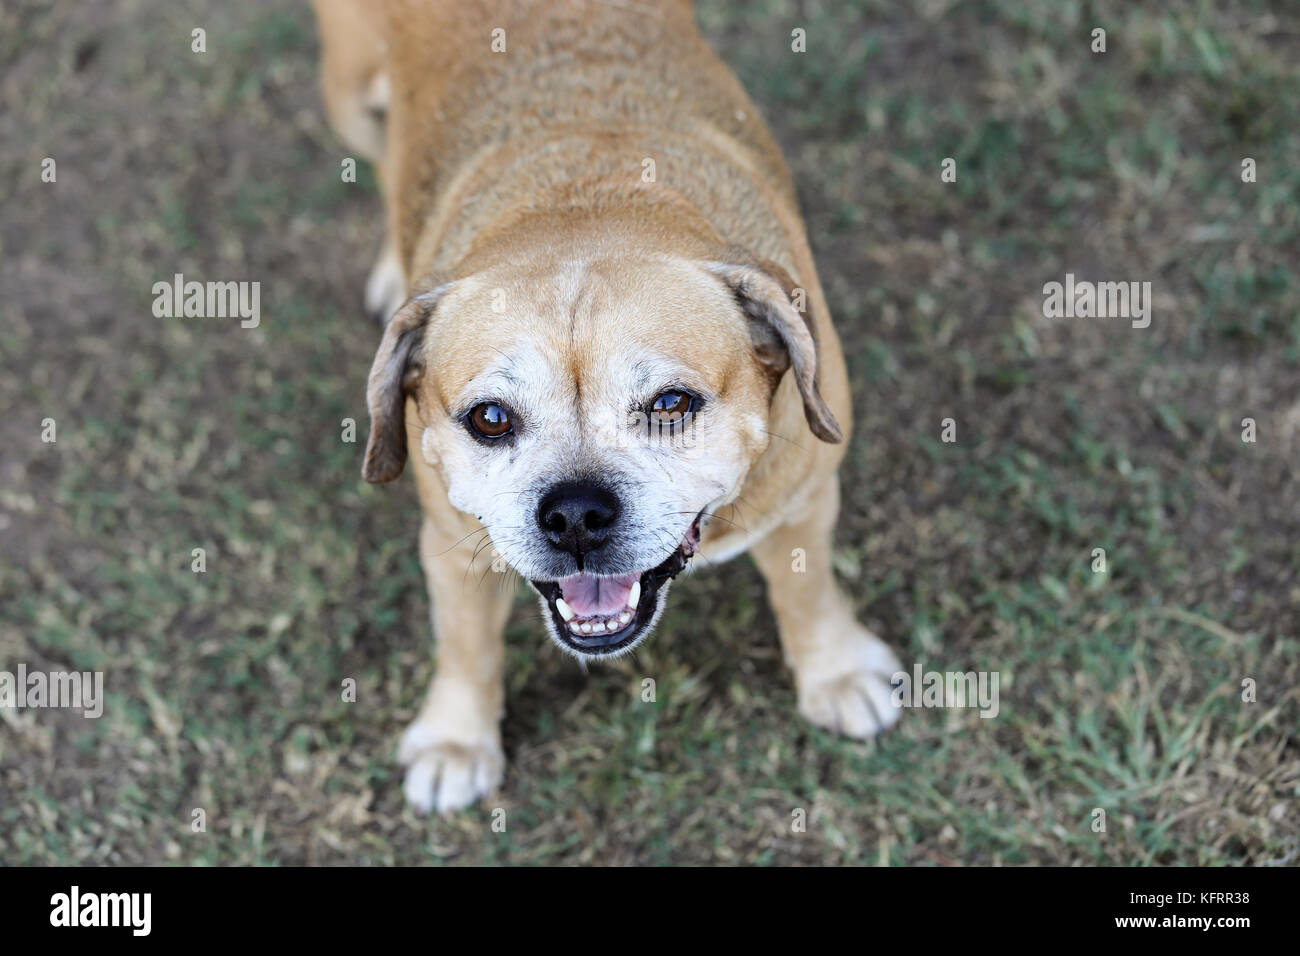 Puggle, Mixed breed of Pug and Beagle, looking up with a joyful expression at a dog park Stock Photo